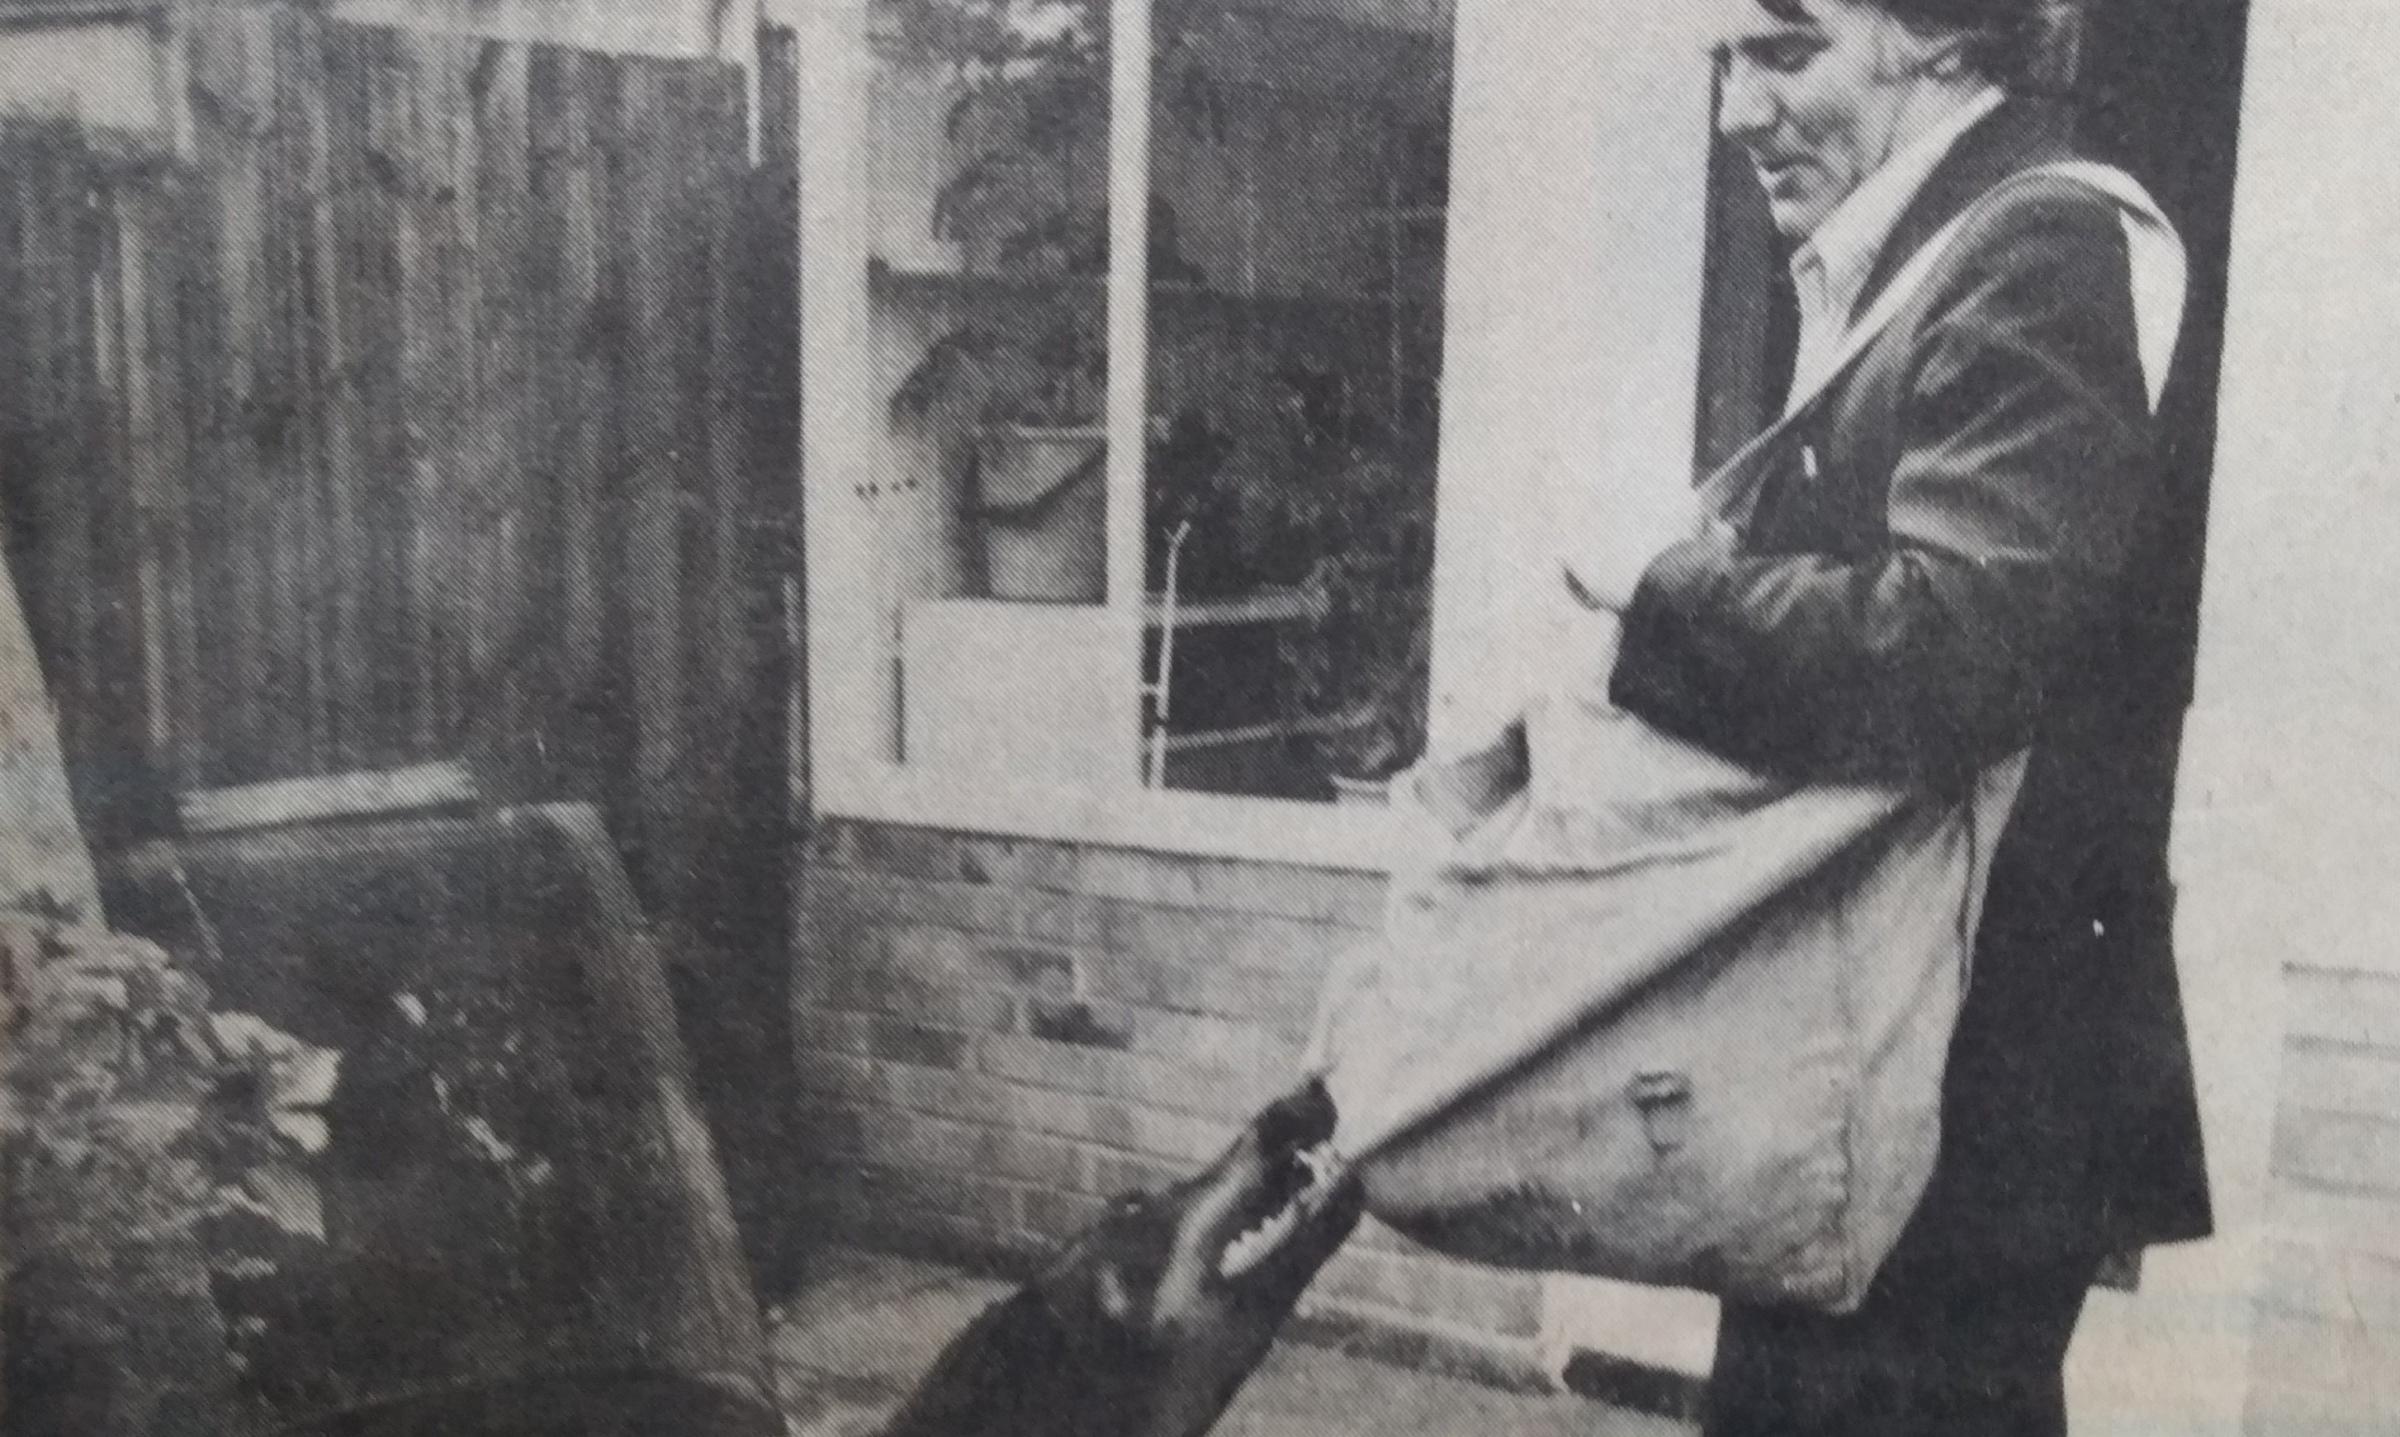 Pete Langley appeared in a feature 40 years ago about the canine problems facing Worcester posties